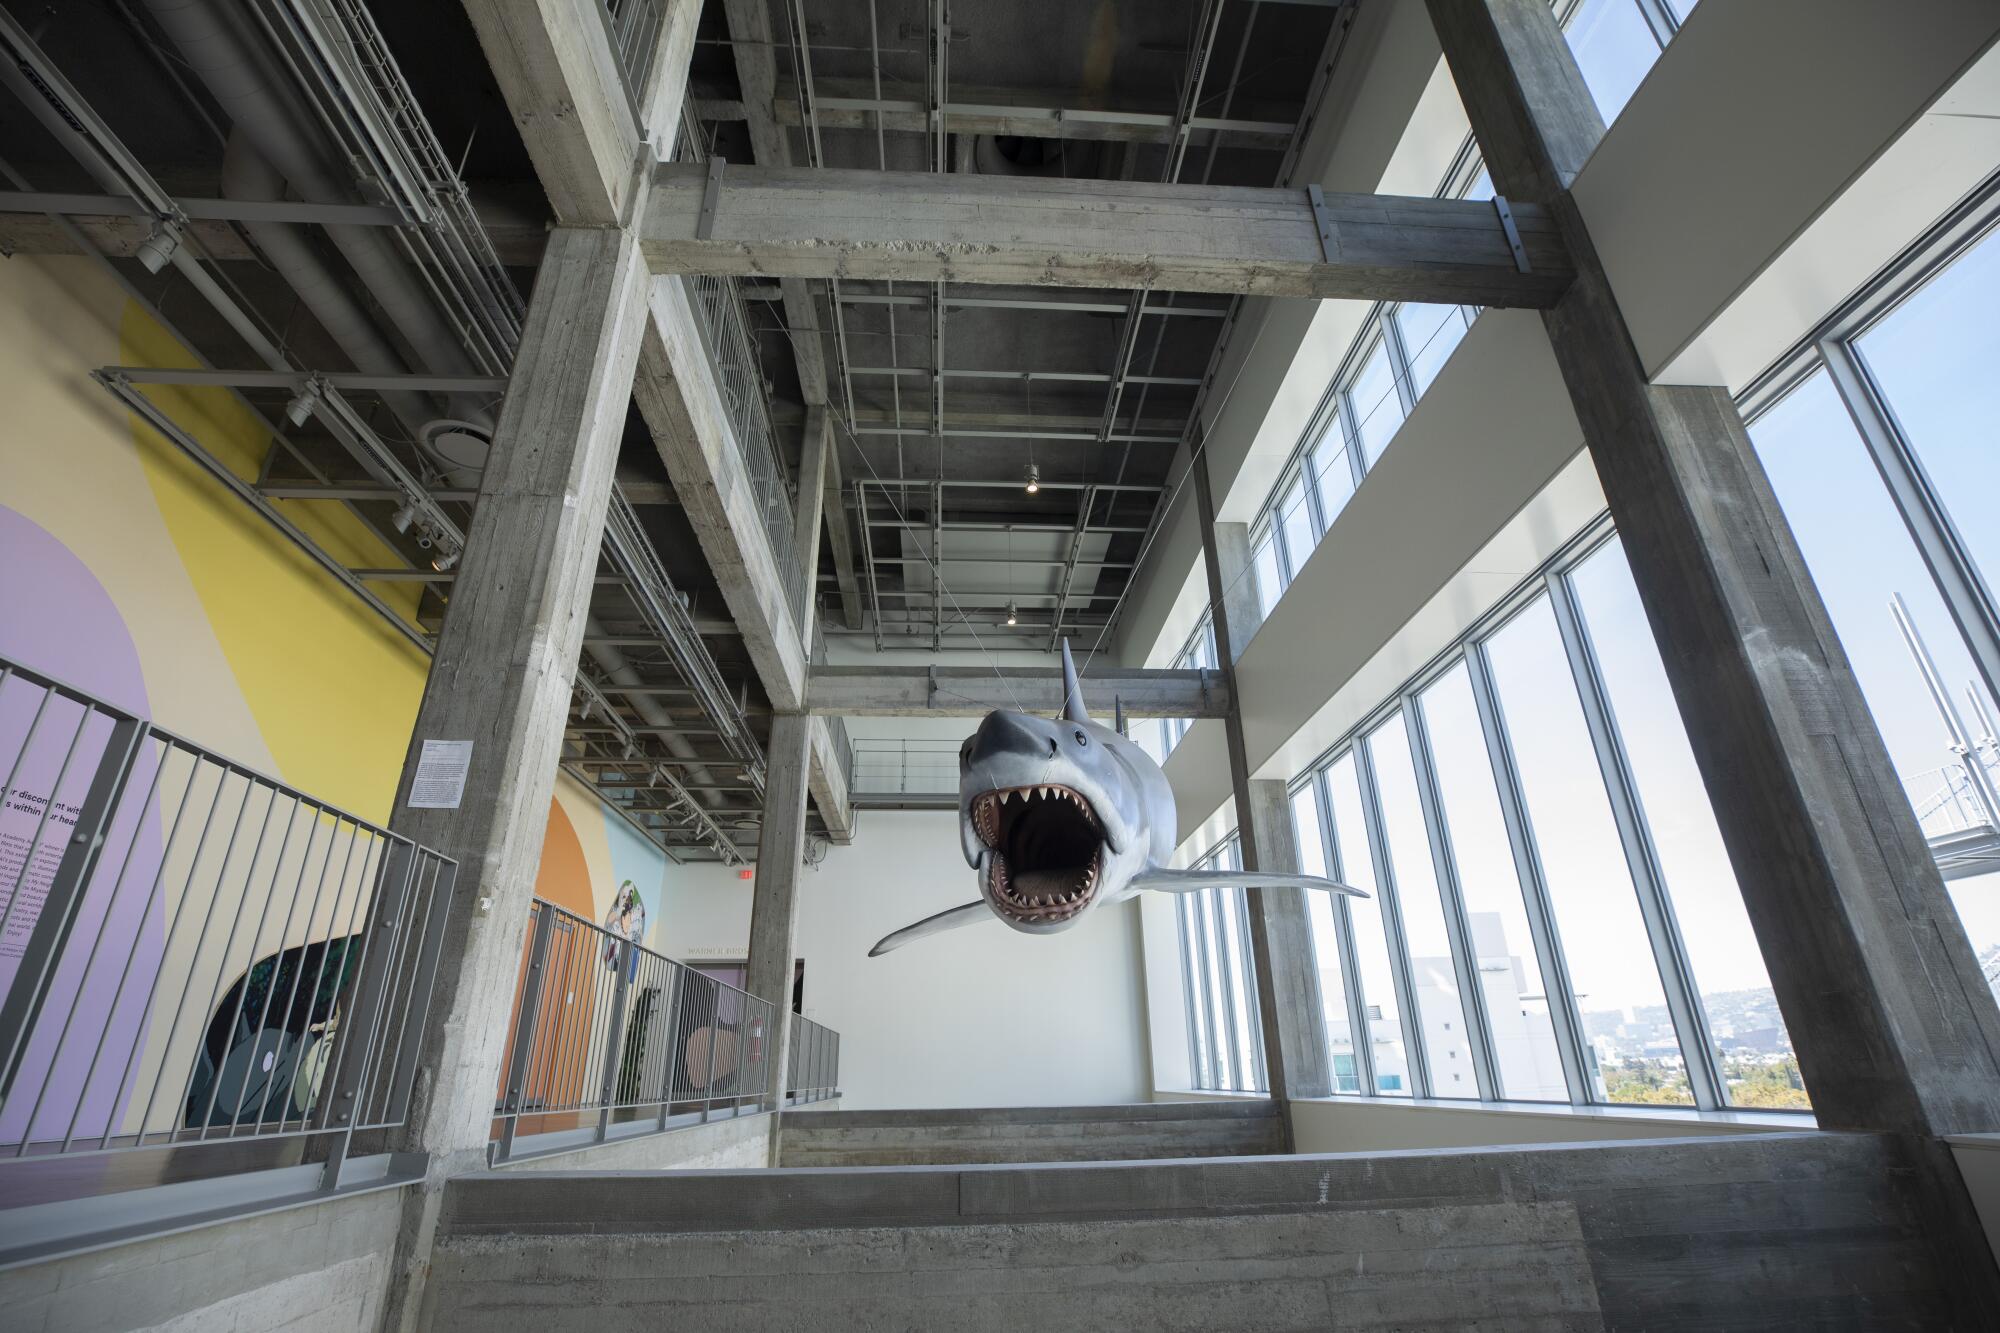 The shark from "Jaws" is seen hanging amid brut concrete columns next to a row of windows